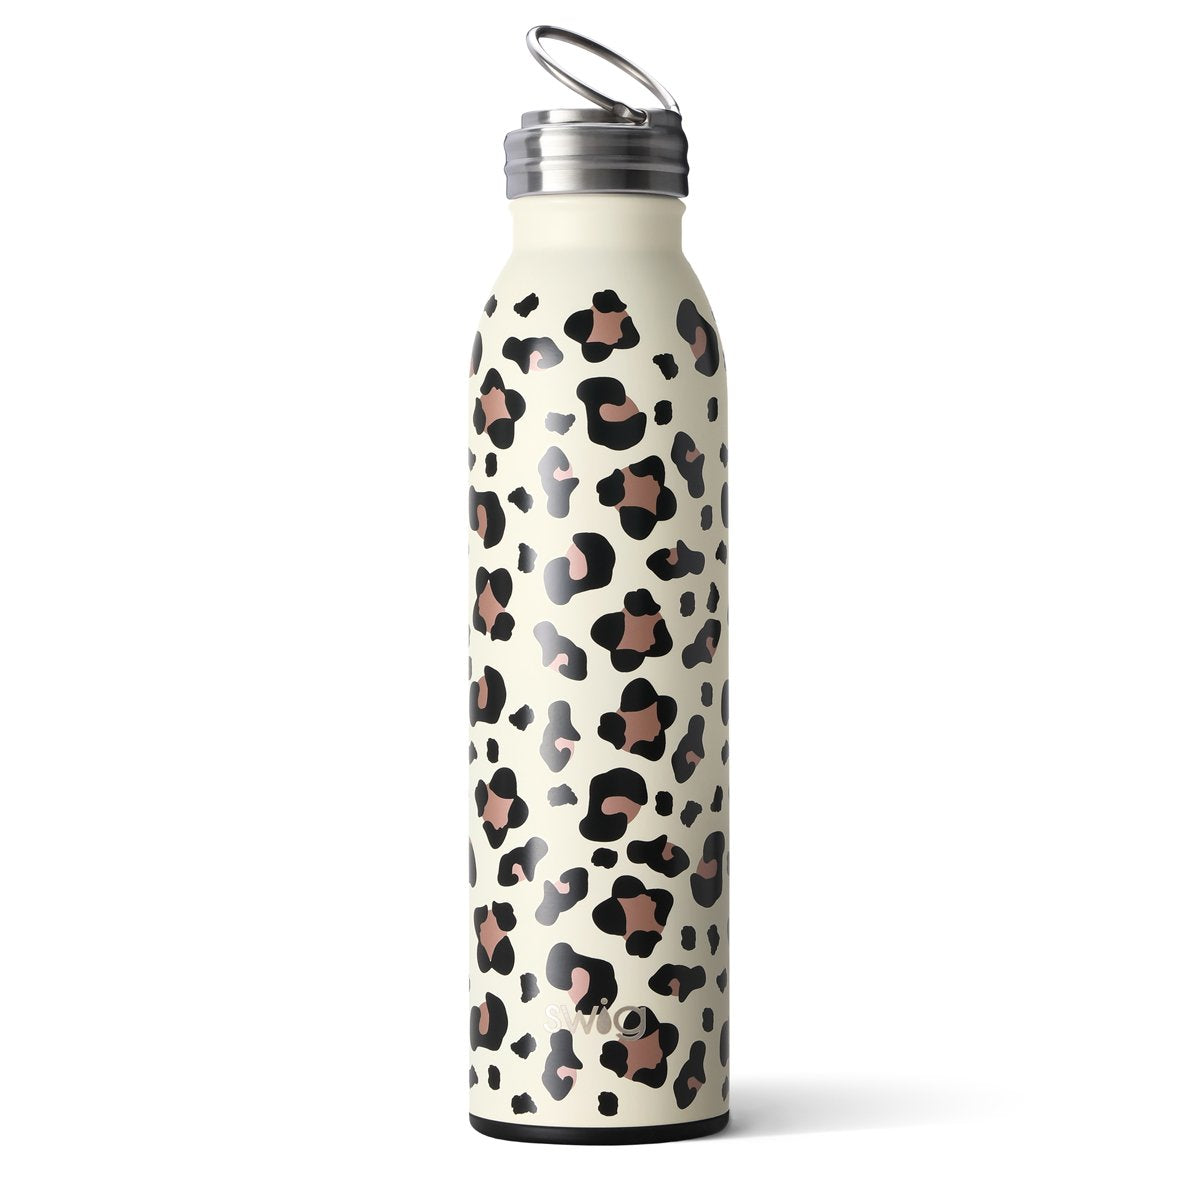 NEW SWIG LIFE 20 OZ INSULATED STAINLESS STEEL MATTE BLACK WATER